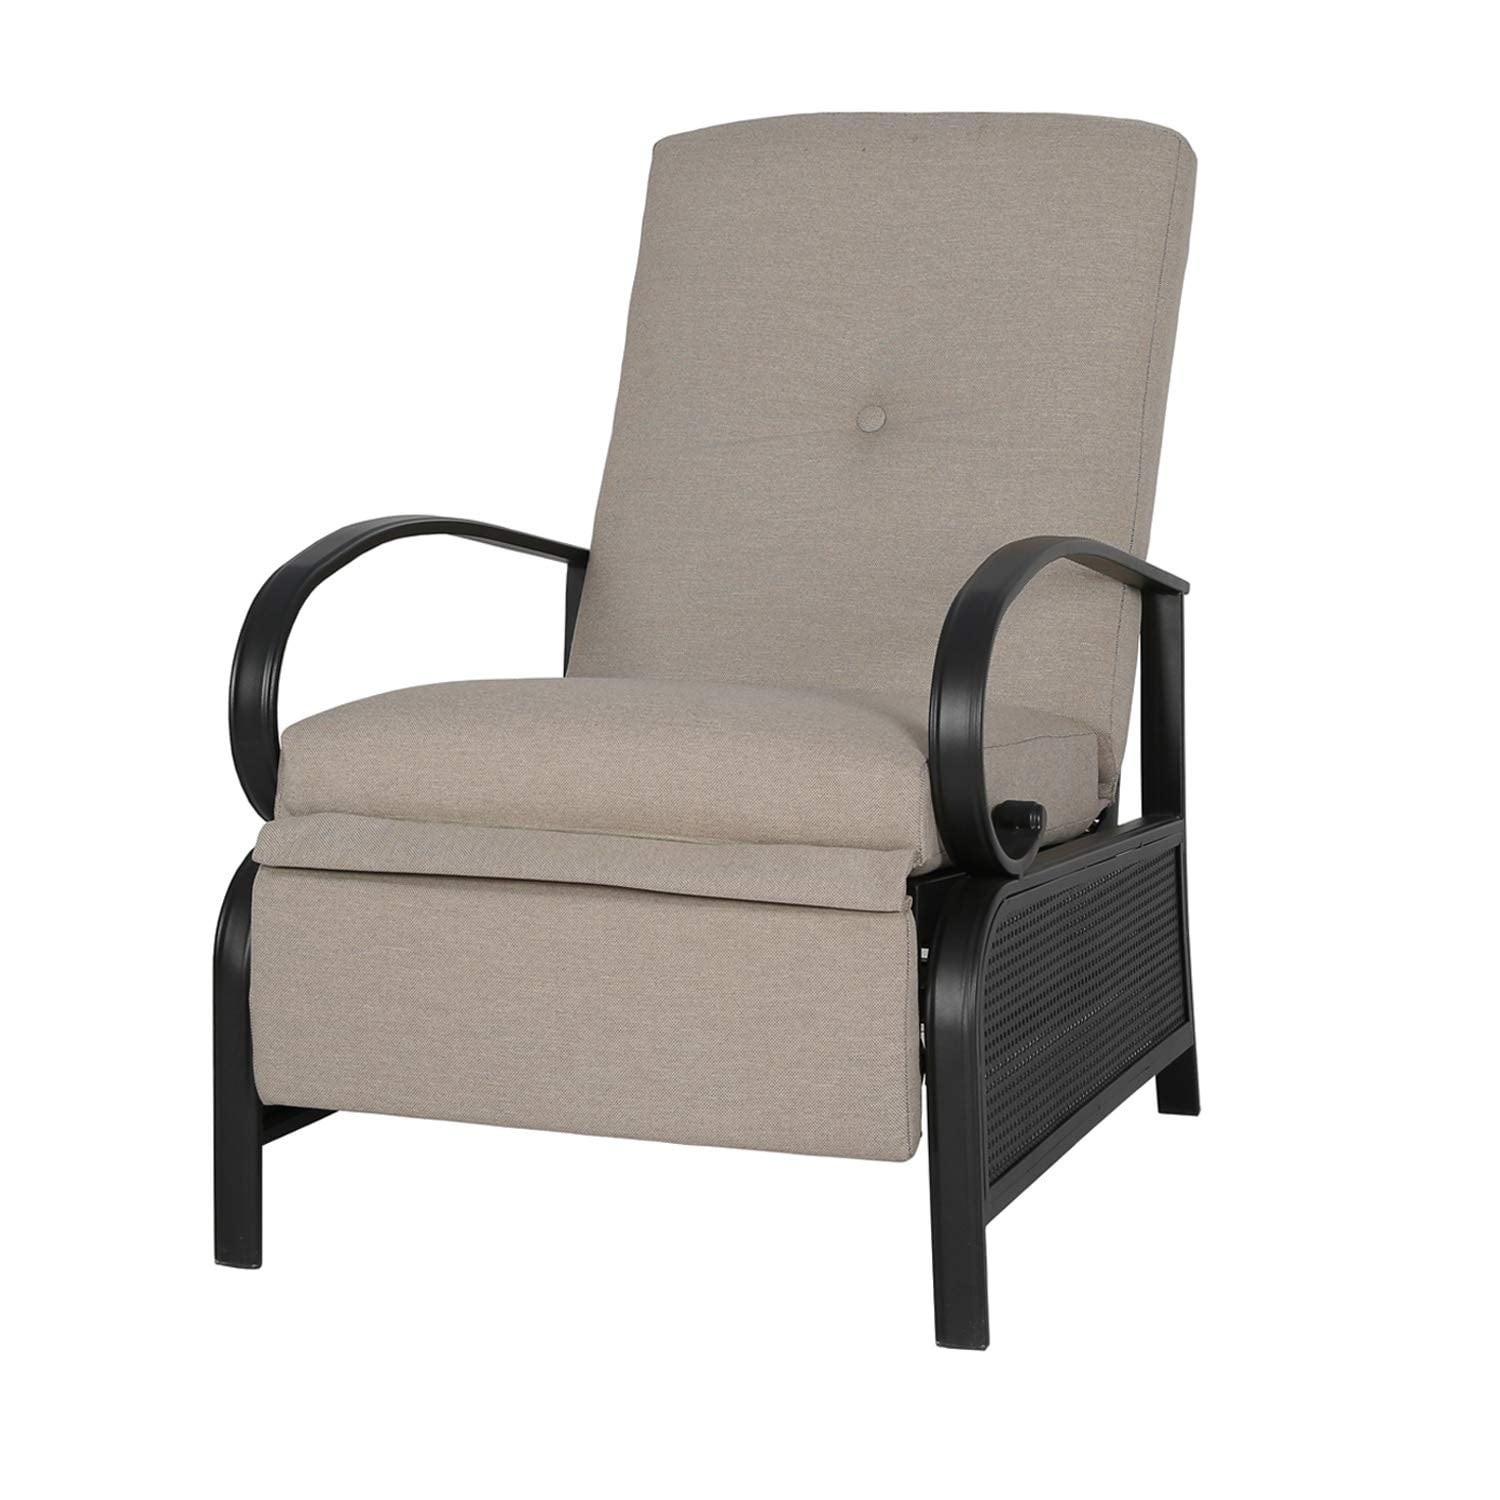 Ulax furniture Patio Recliner Chair Automatic Adjustable Back Outdoor